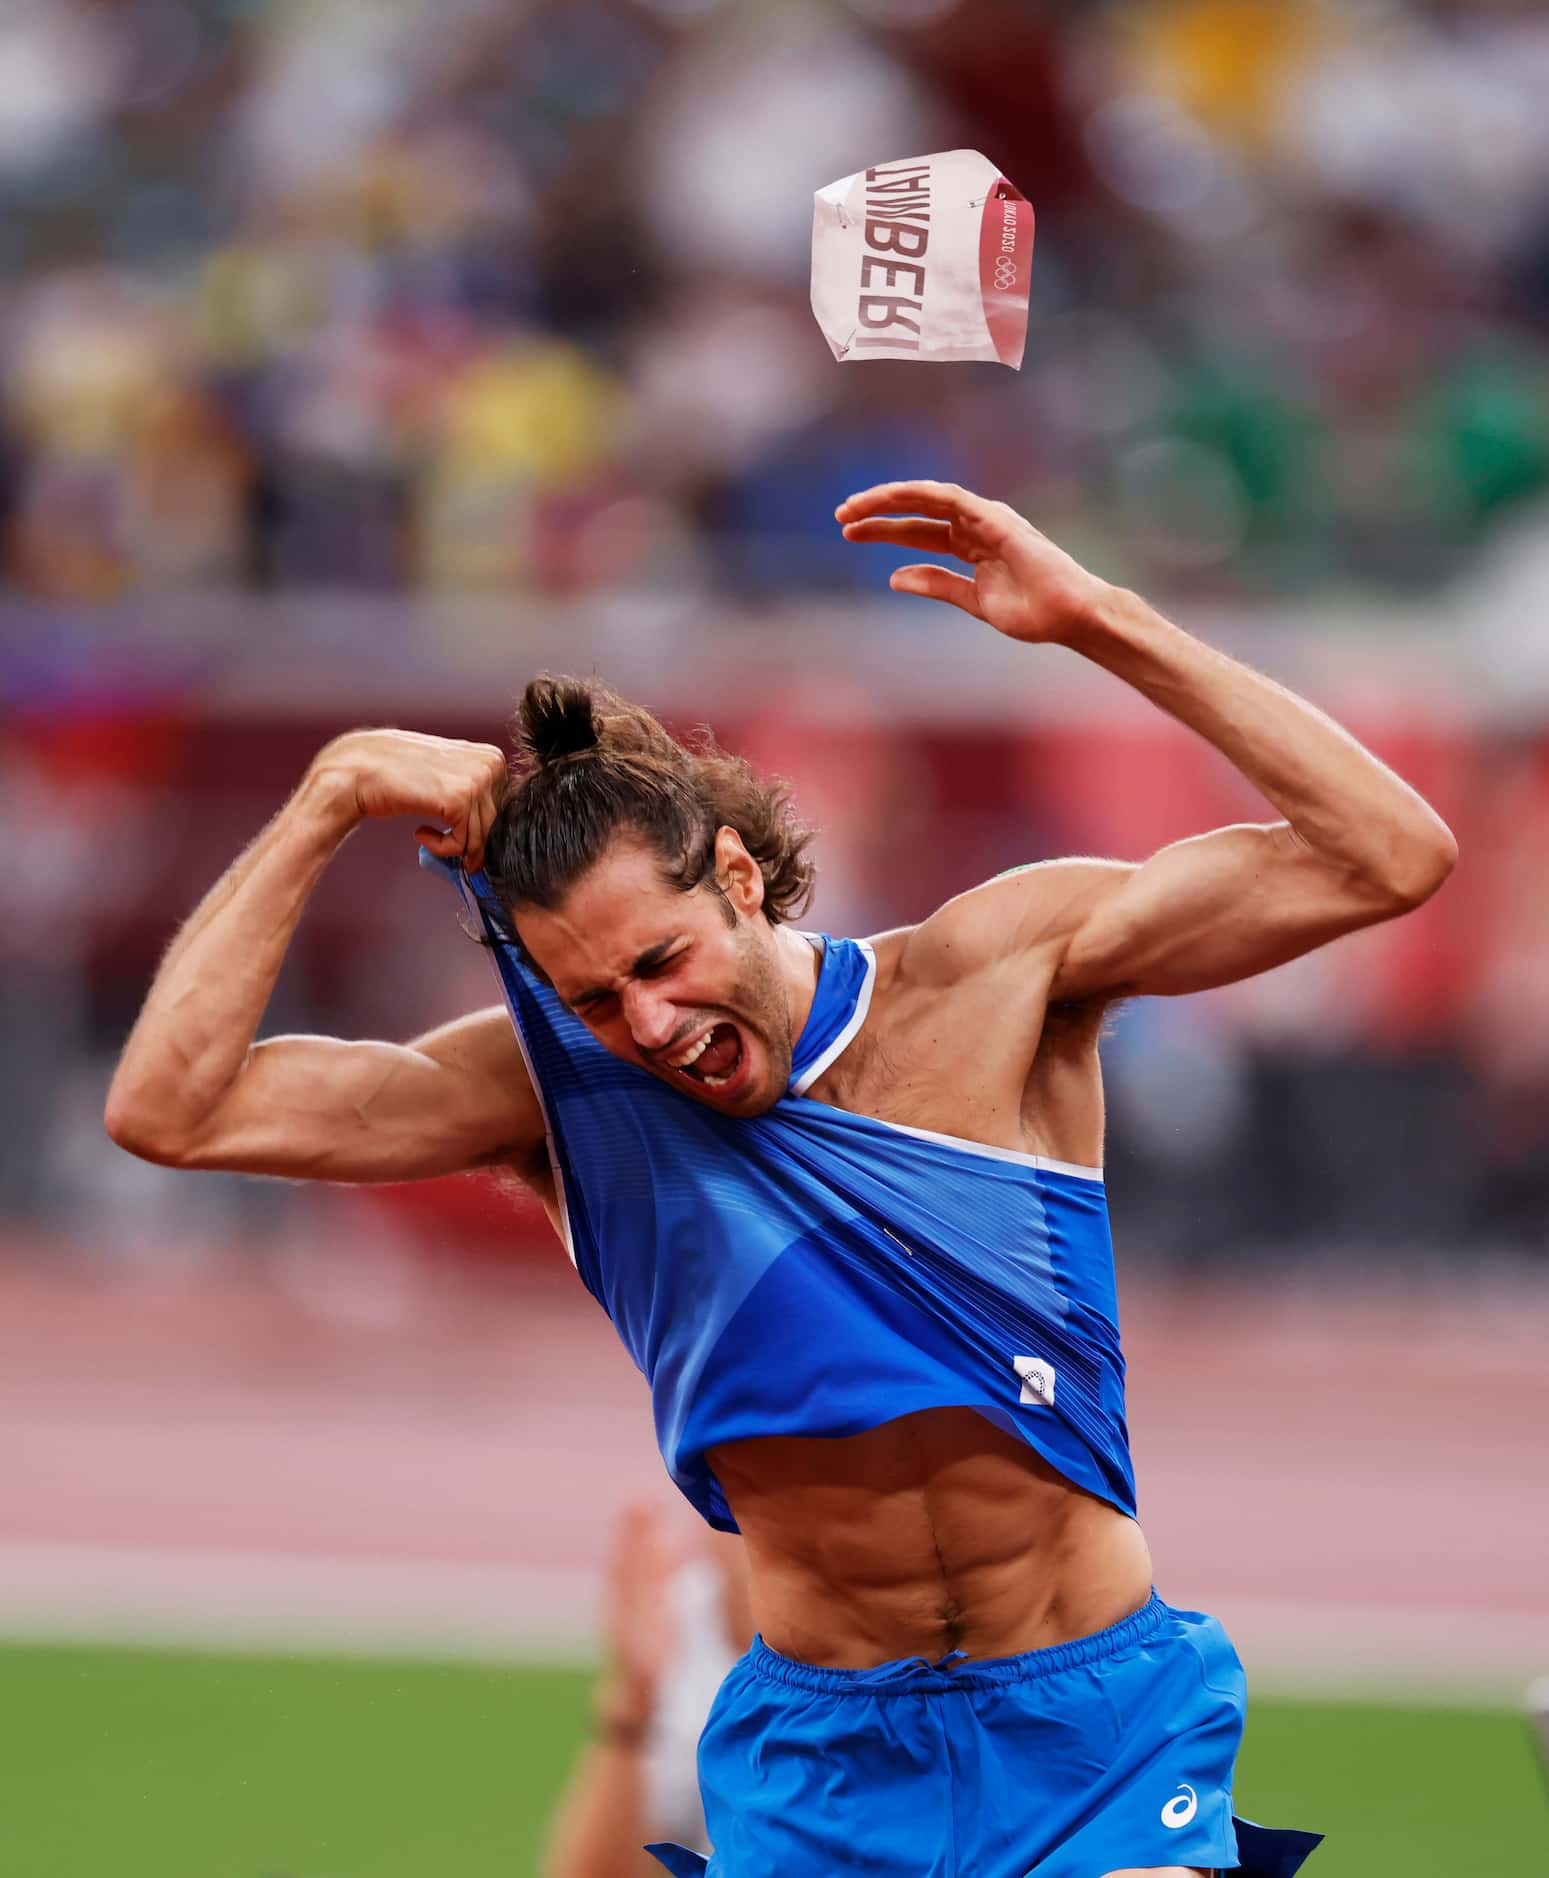 Italy’s Gianmarco Tamberi celebrates after winning a gold medal in the men’s high jump final...